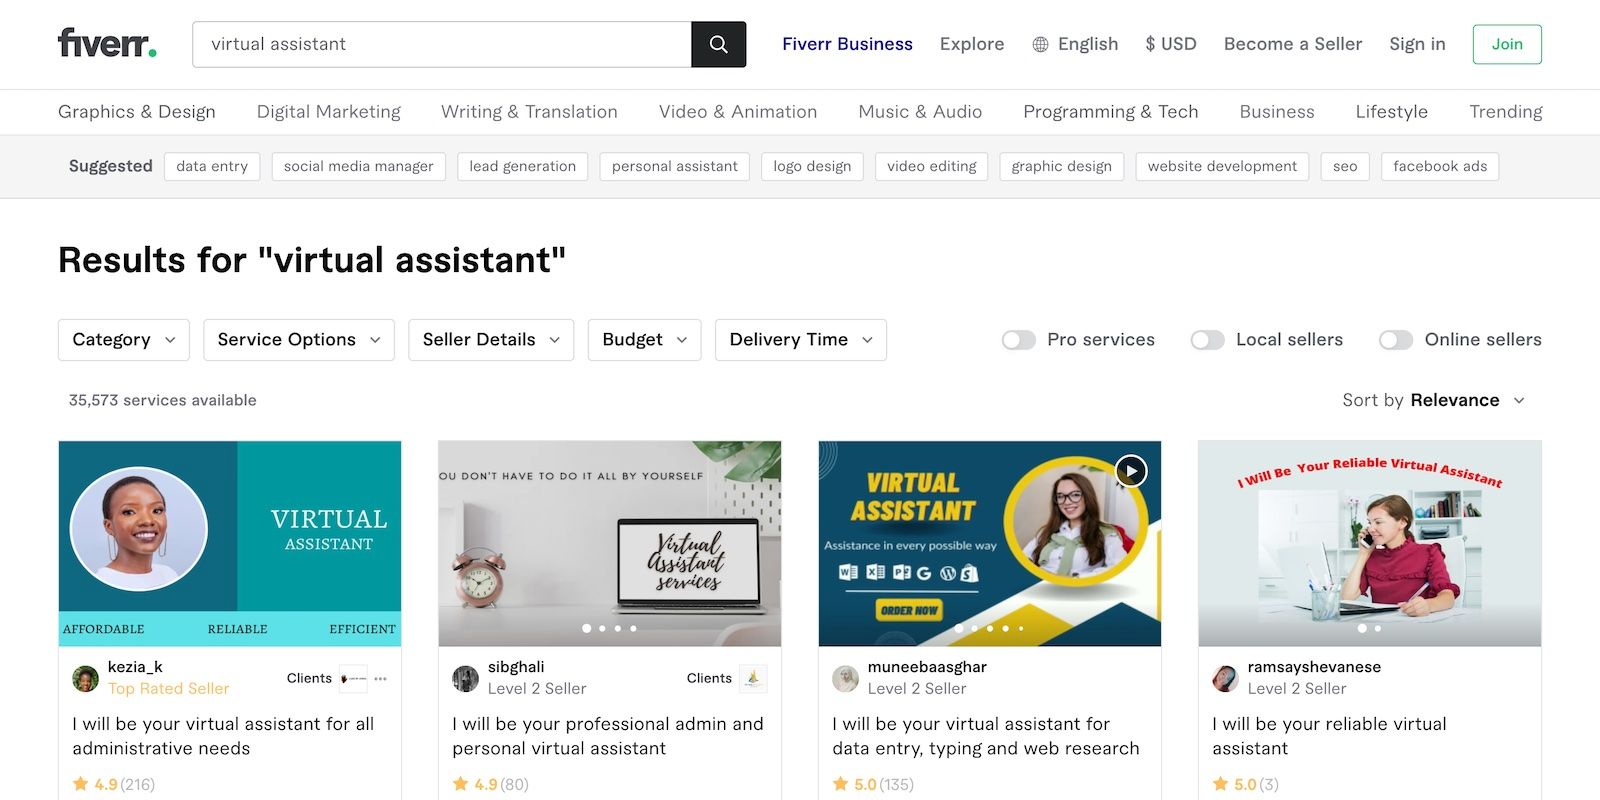 Search Results for Virtual Assistant Jobs on Fiverr